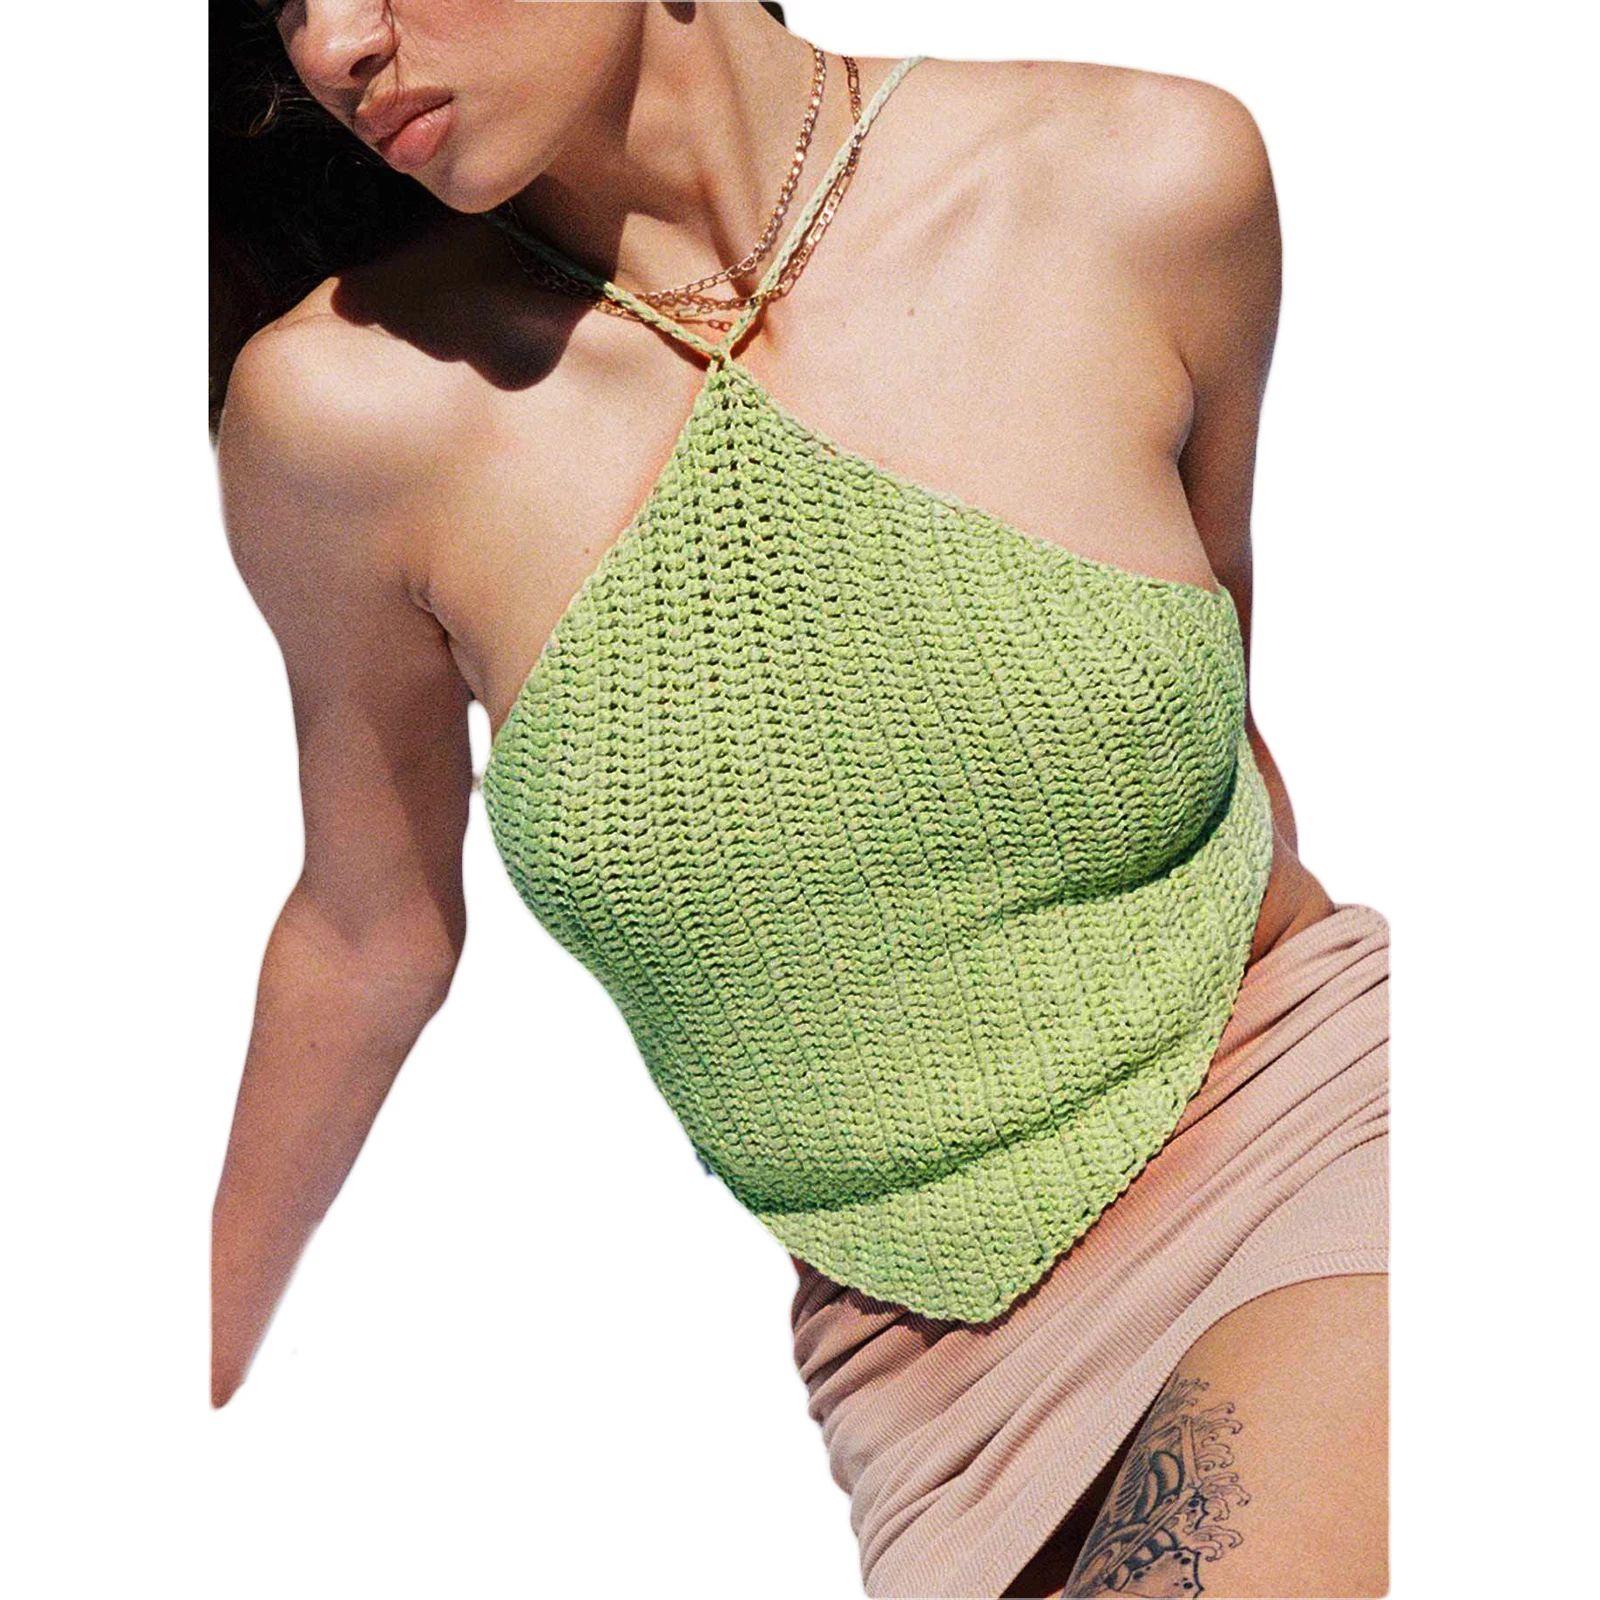 

Women's Crop Cami Tops, Sleeveless Criss Cross Self-Tie Backless Solid Color Crochet Camisole